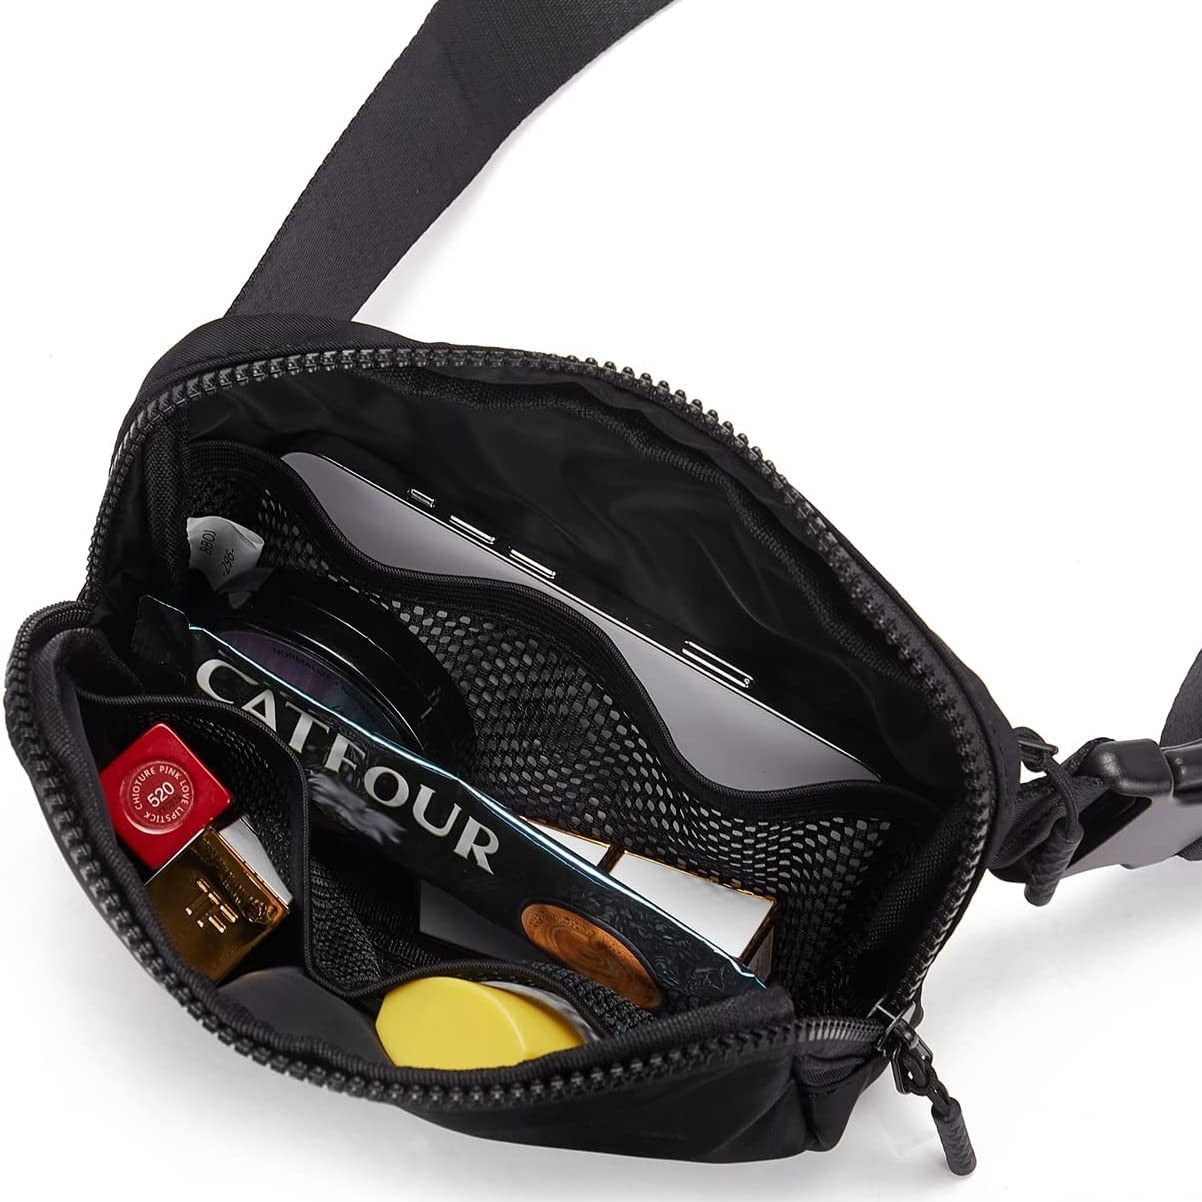 Realaiot Belt Bag Small Waist Bag Crossbody Fanny Packs for Women Men Waterproof Everywhere Fanny Pack for Sports Running Outing